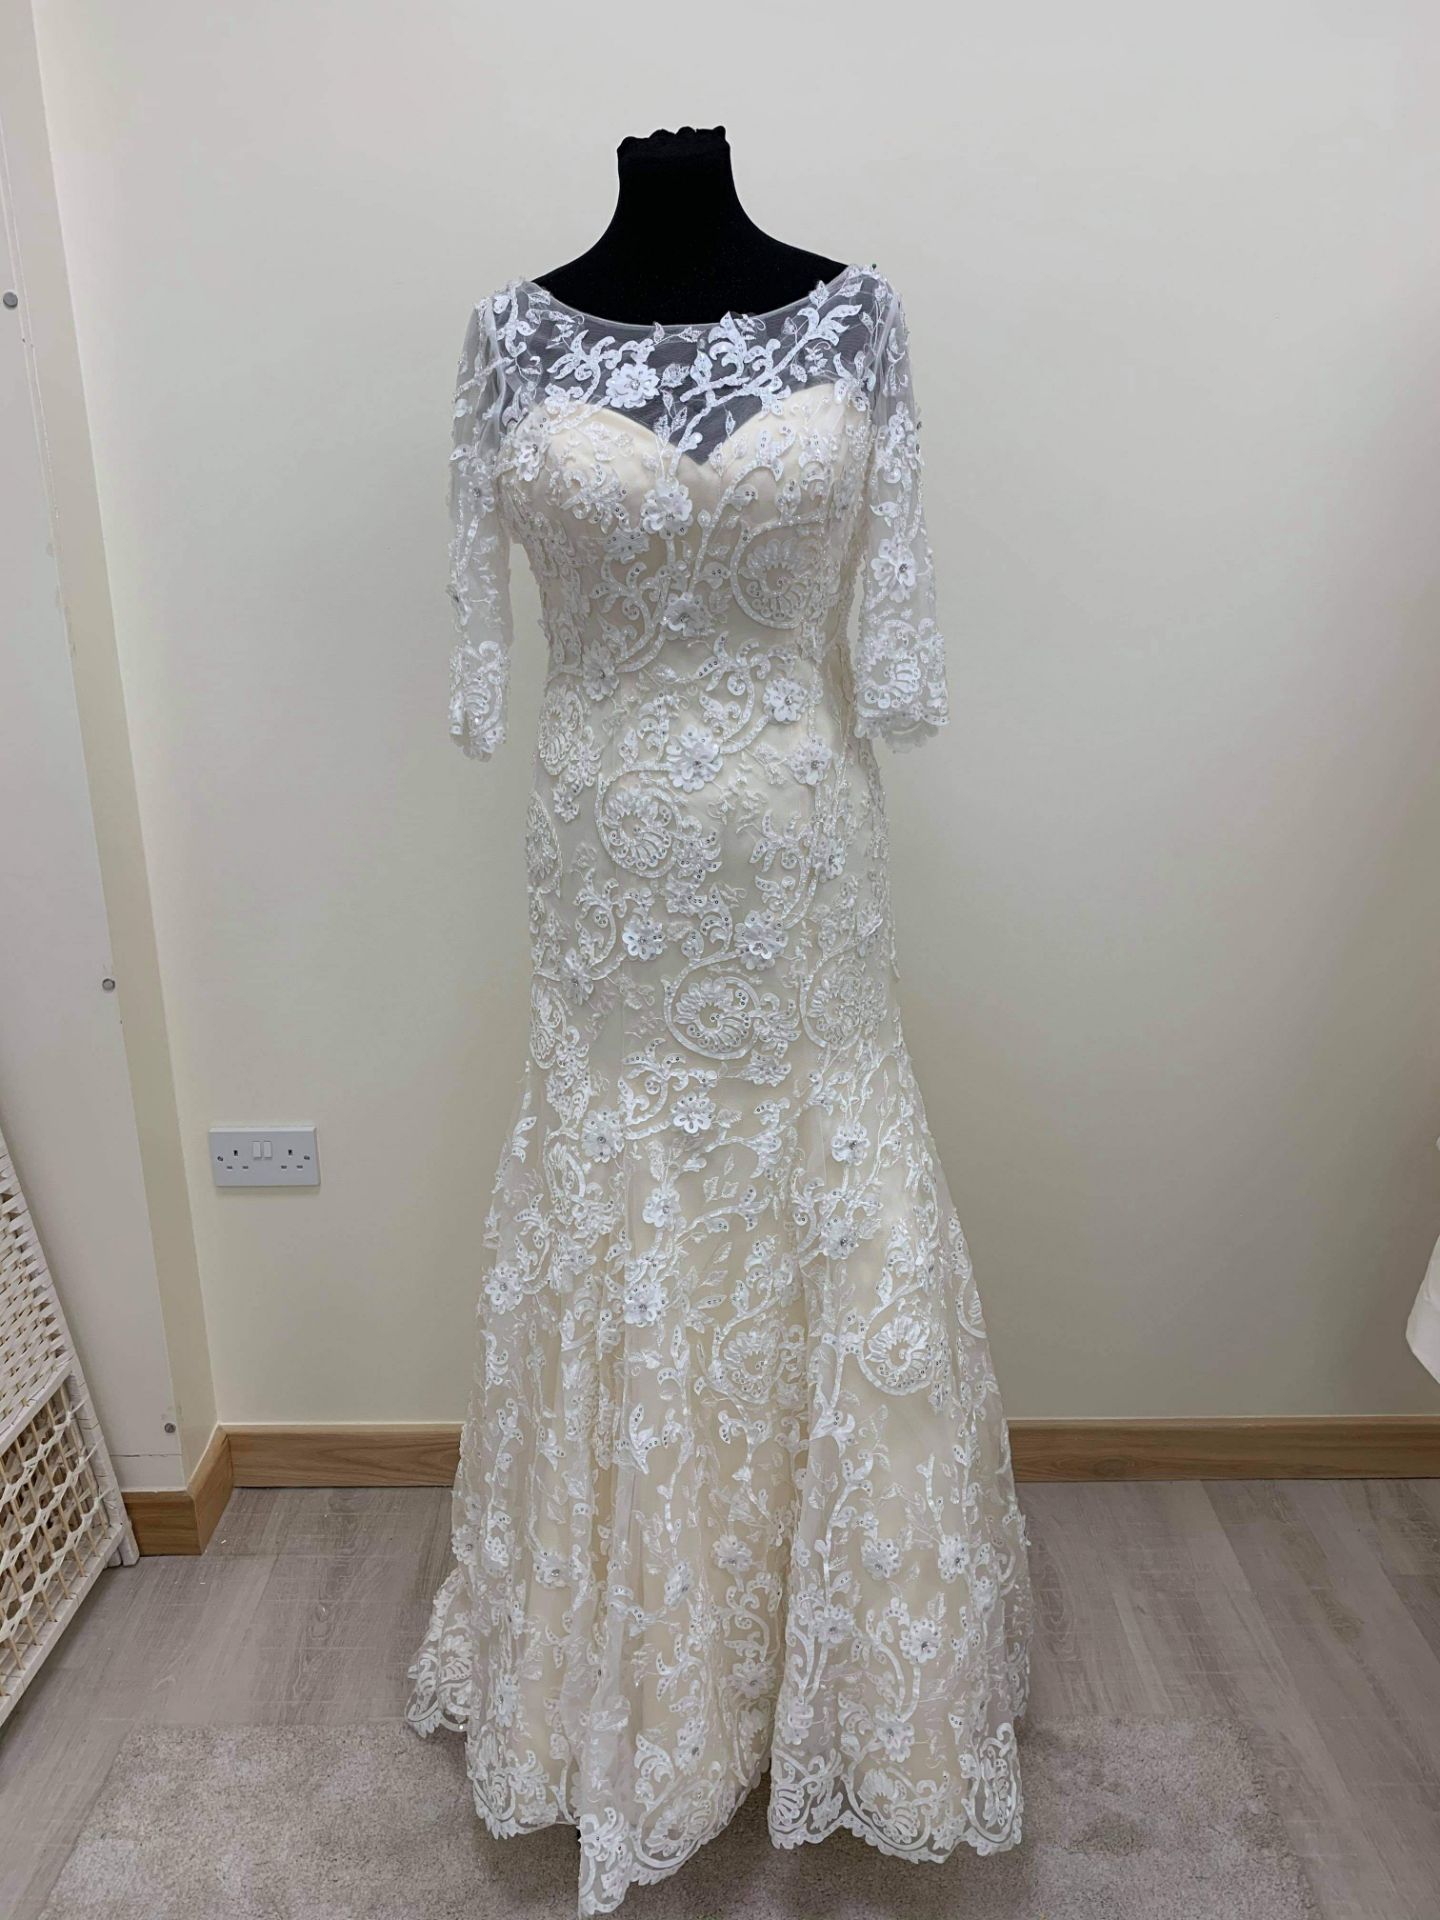 Bulk Lot of 25 Wedding Gowns/Bodices/Skirts All Mixed Sizes and Designs. RRP £25K Etx. Mainly Iv... - Image 2 of 2